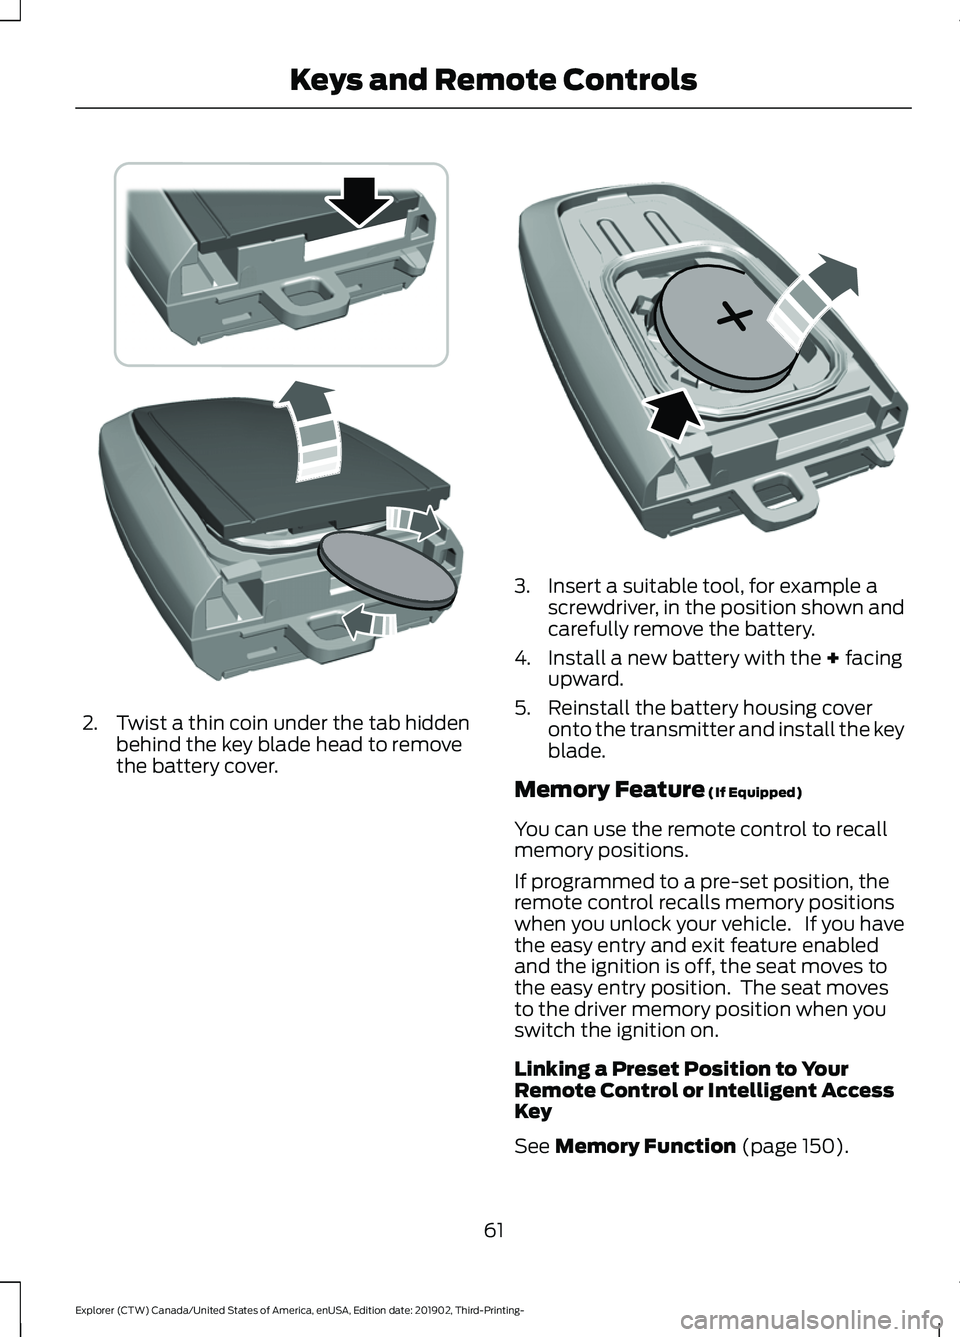 FORD EXPLORER 2020  Owners Manual 2. Twist a thin coin under the tab hidden
behind the key blade head to remove
the battery cover. 3. Insert a suitable tool, for example a
screwdriver, in the position shown and
carefully remove the ba